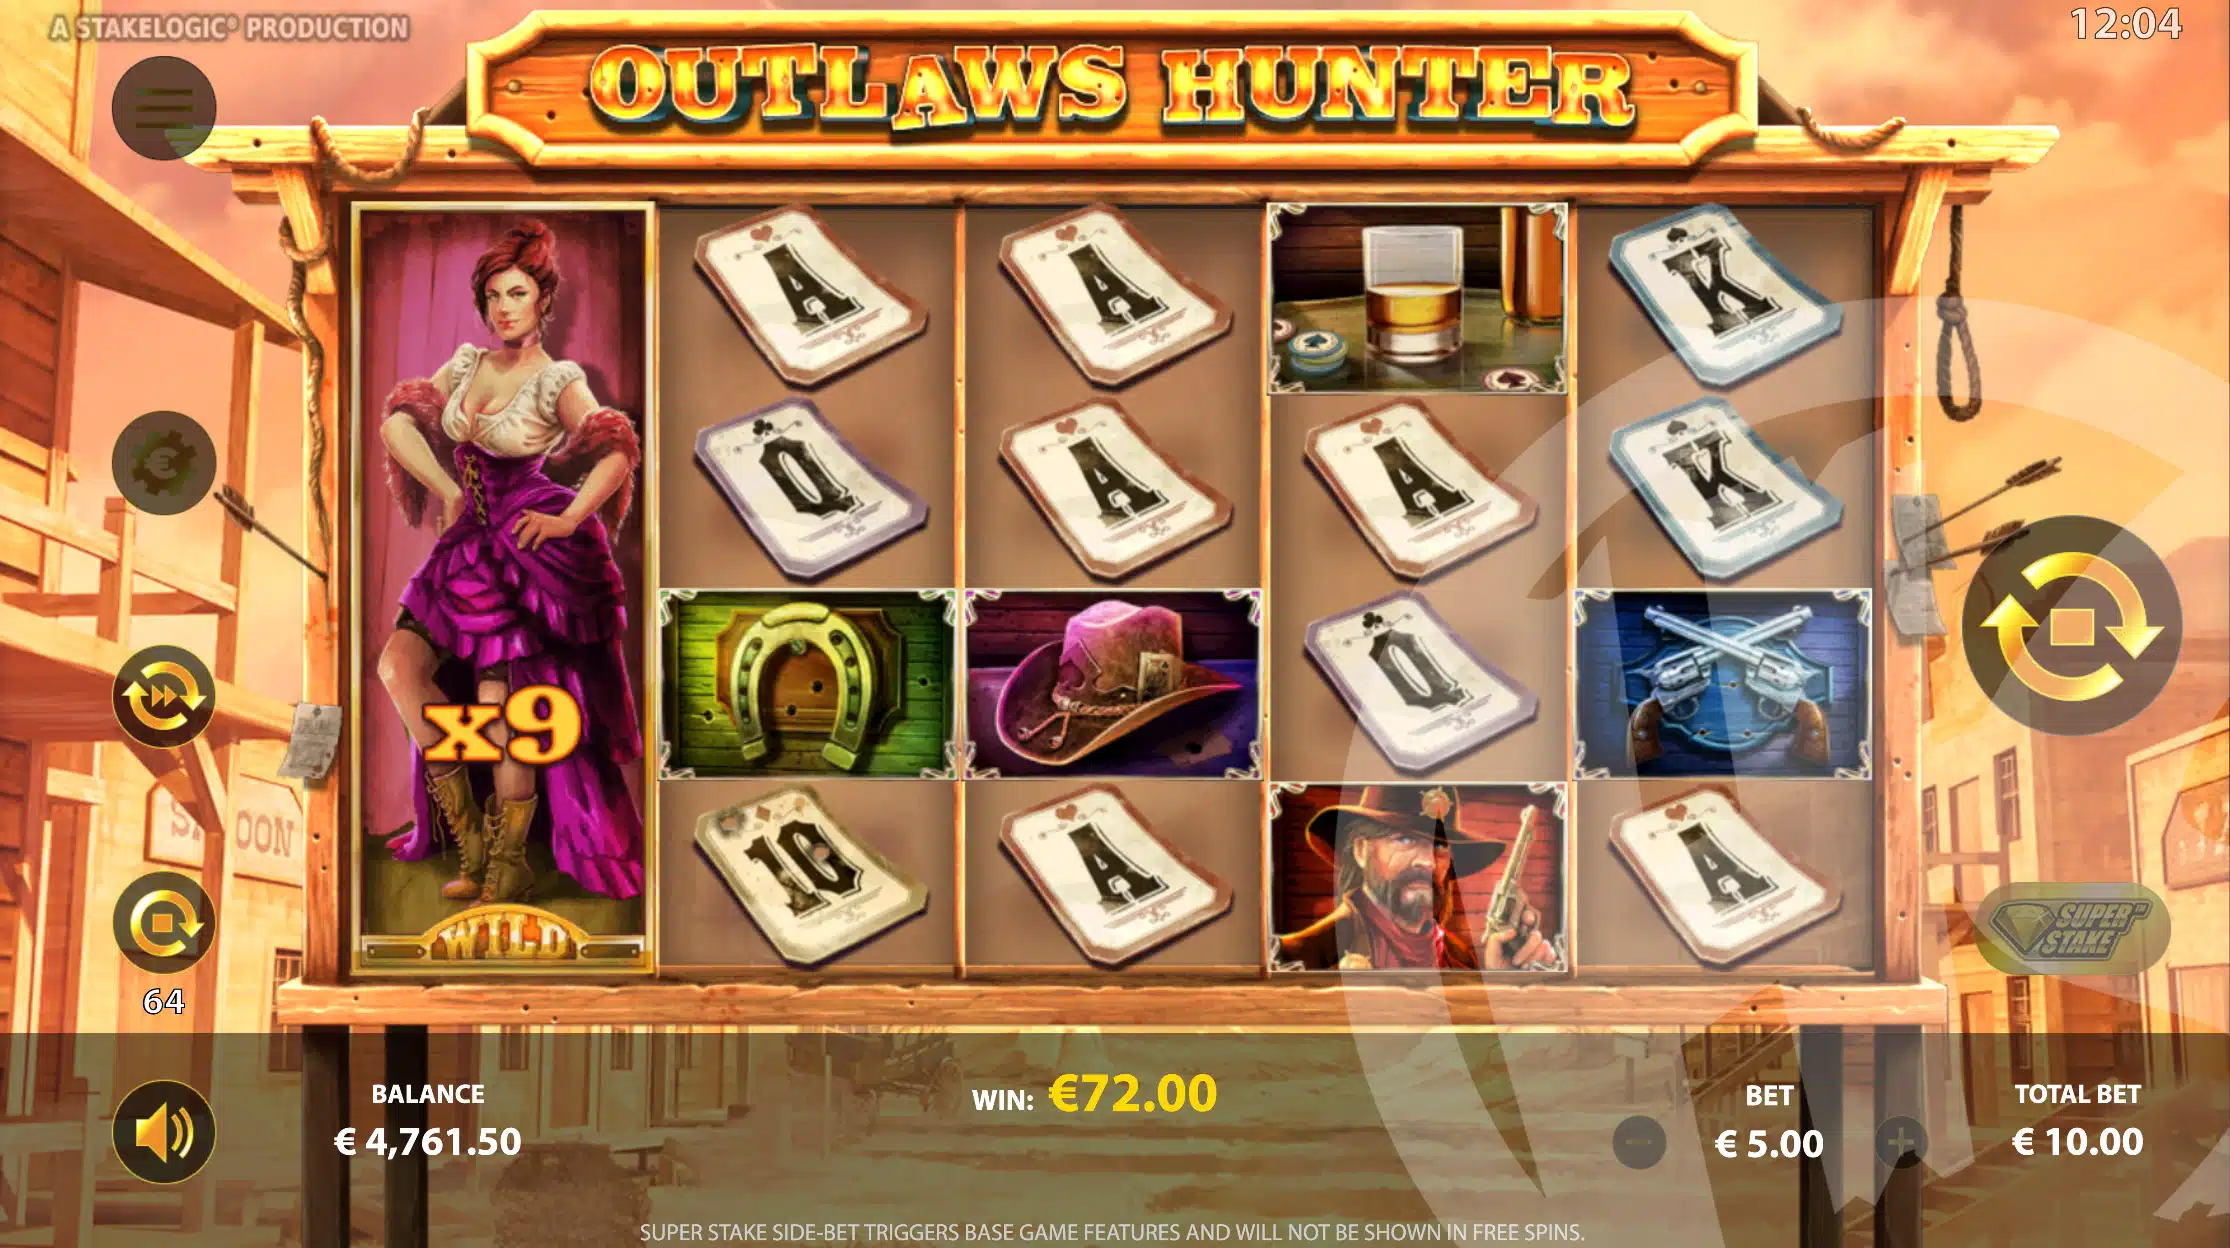 Outlaw Wild Reels Take on Multipliers up to x20